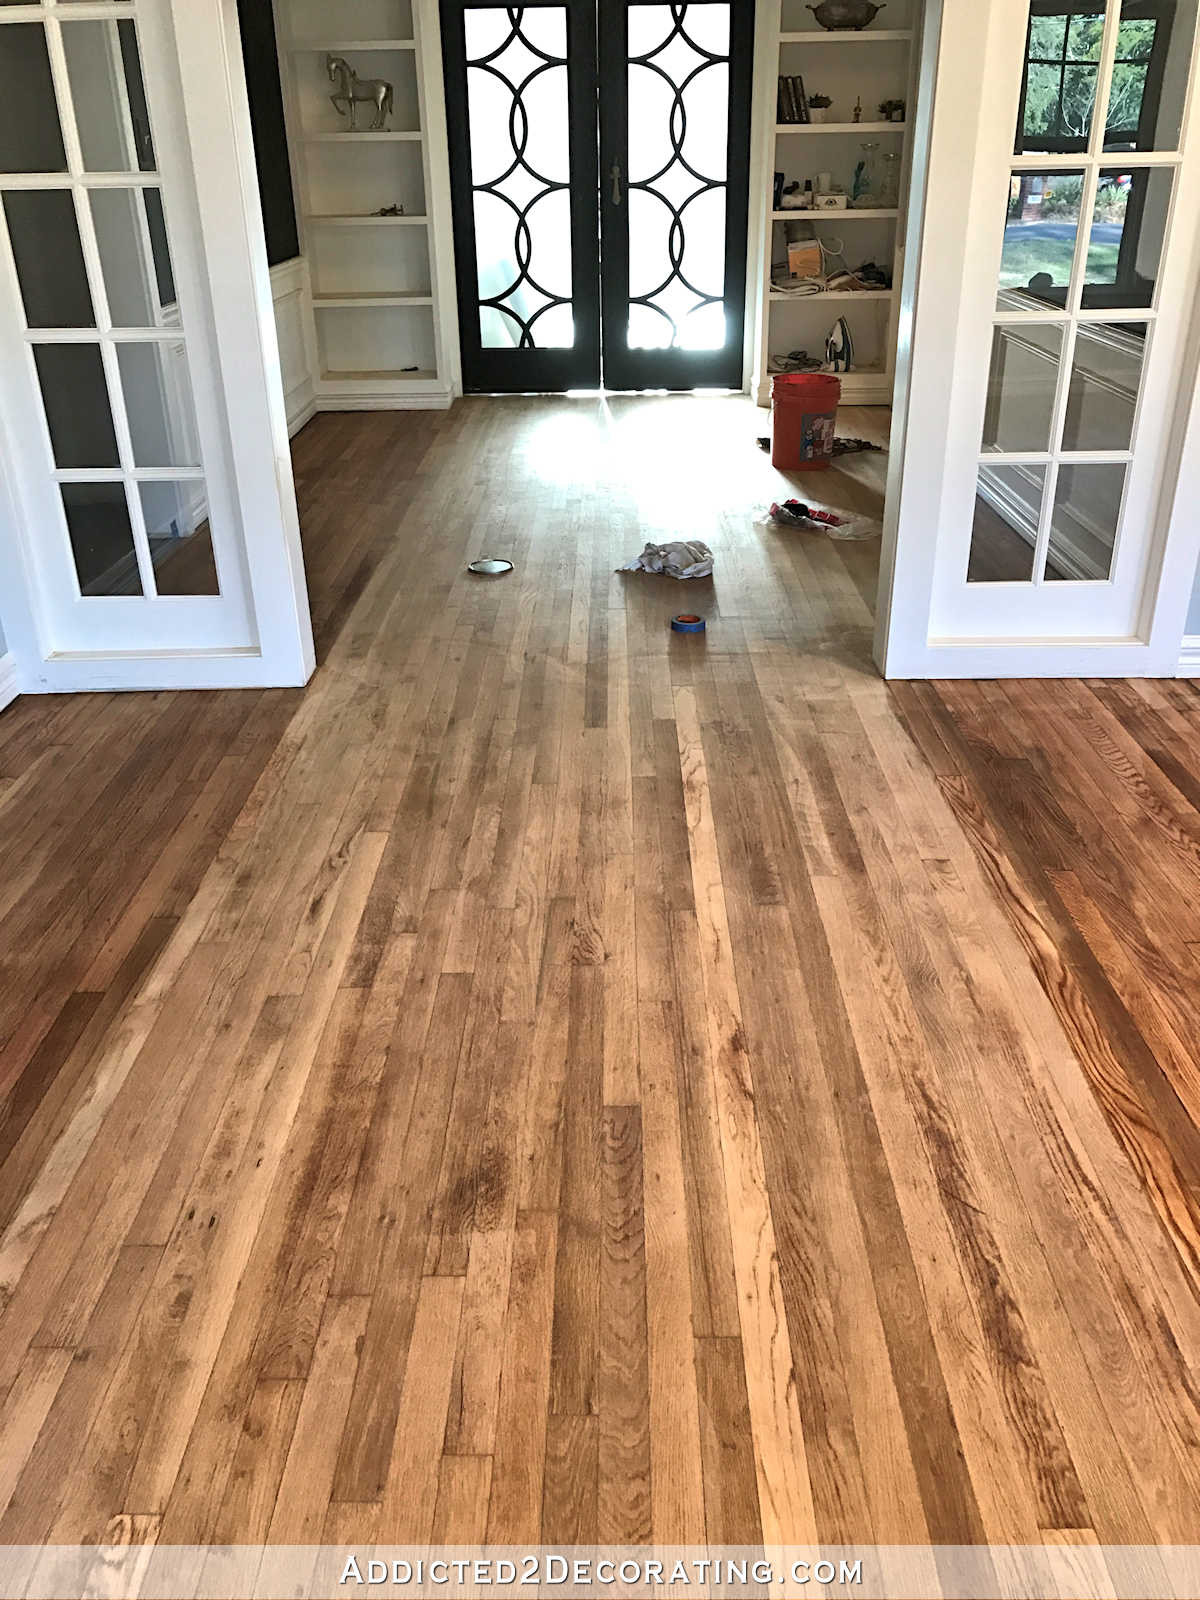 14 Lovely How Much to Refinish Hardwood Floors Yourself 2023 free download how much to refinish hardwood floors yourself of adventures in staining my red oak hardwood floors products process throughout staining red oak hardwood floors 5 music room wood conditioner